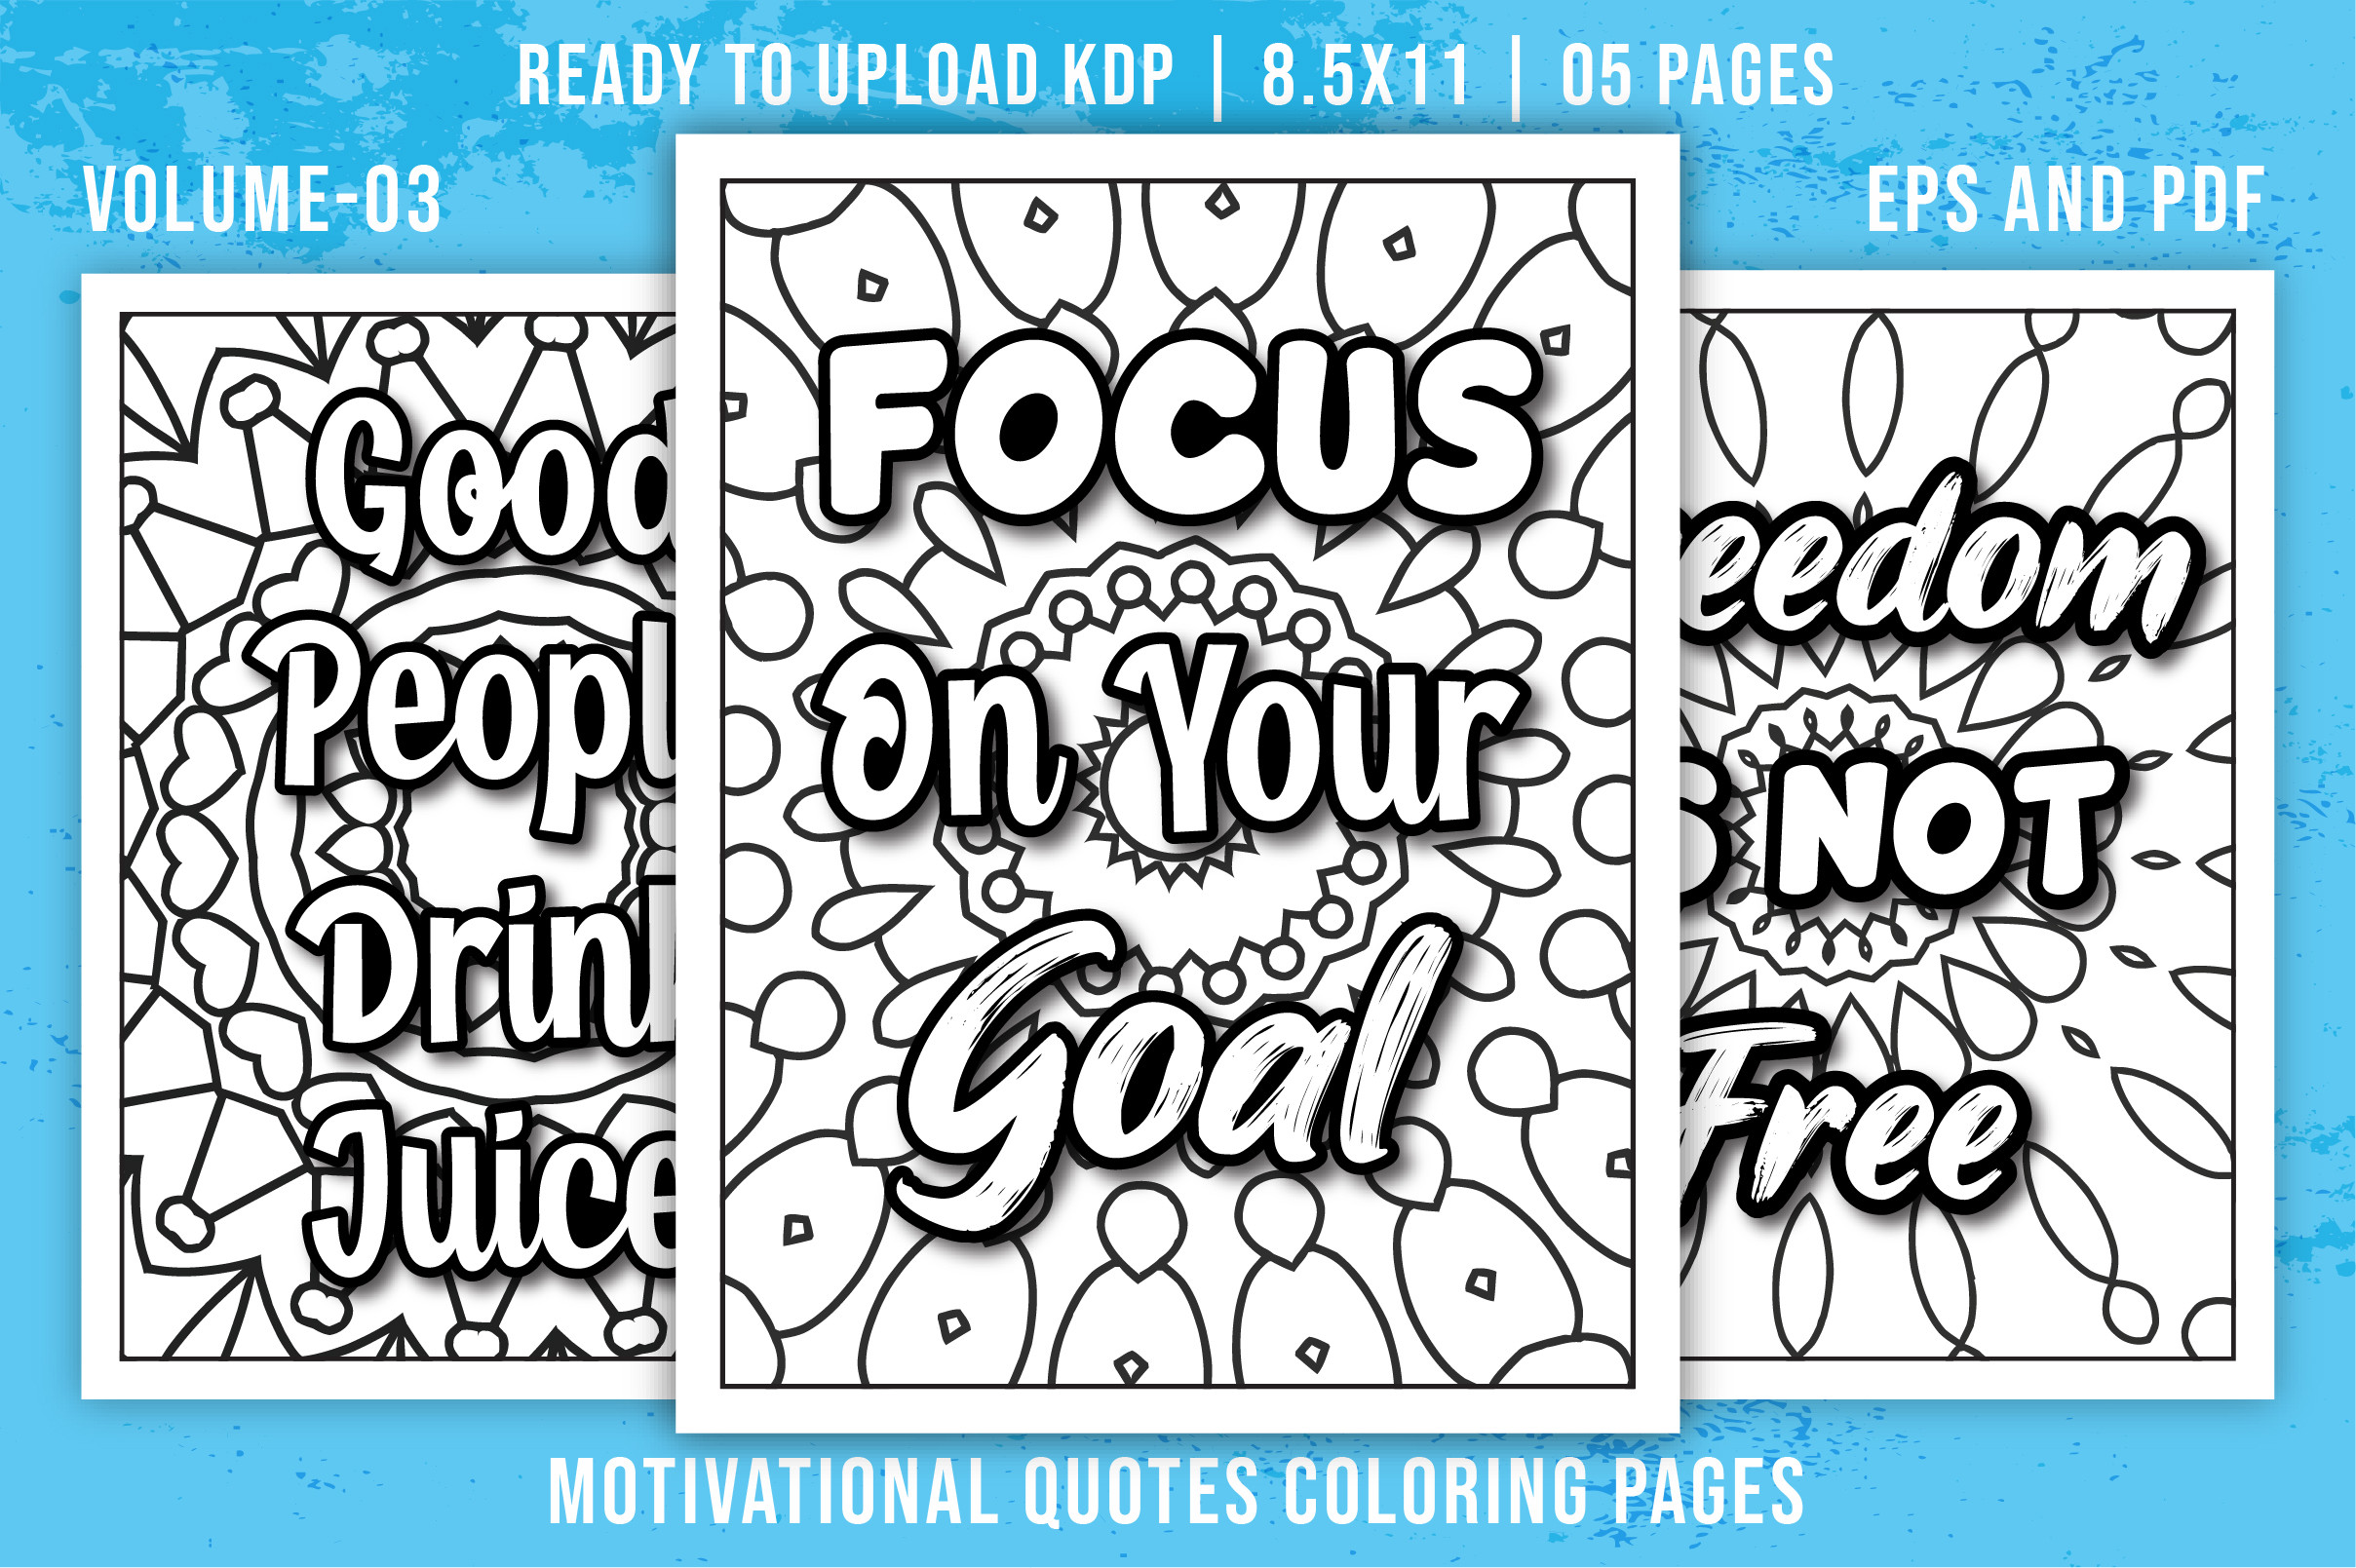 Motivational Quotes Coloring Pages Graphic by mirazooze · Creative Fabrica